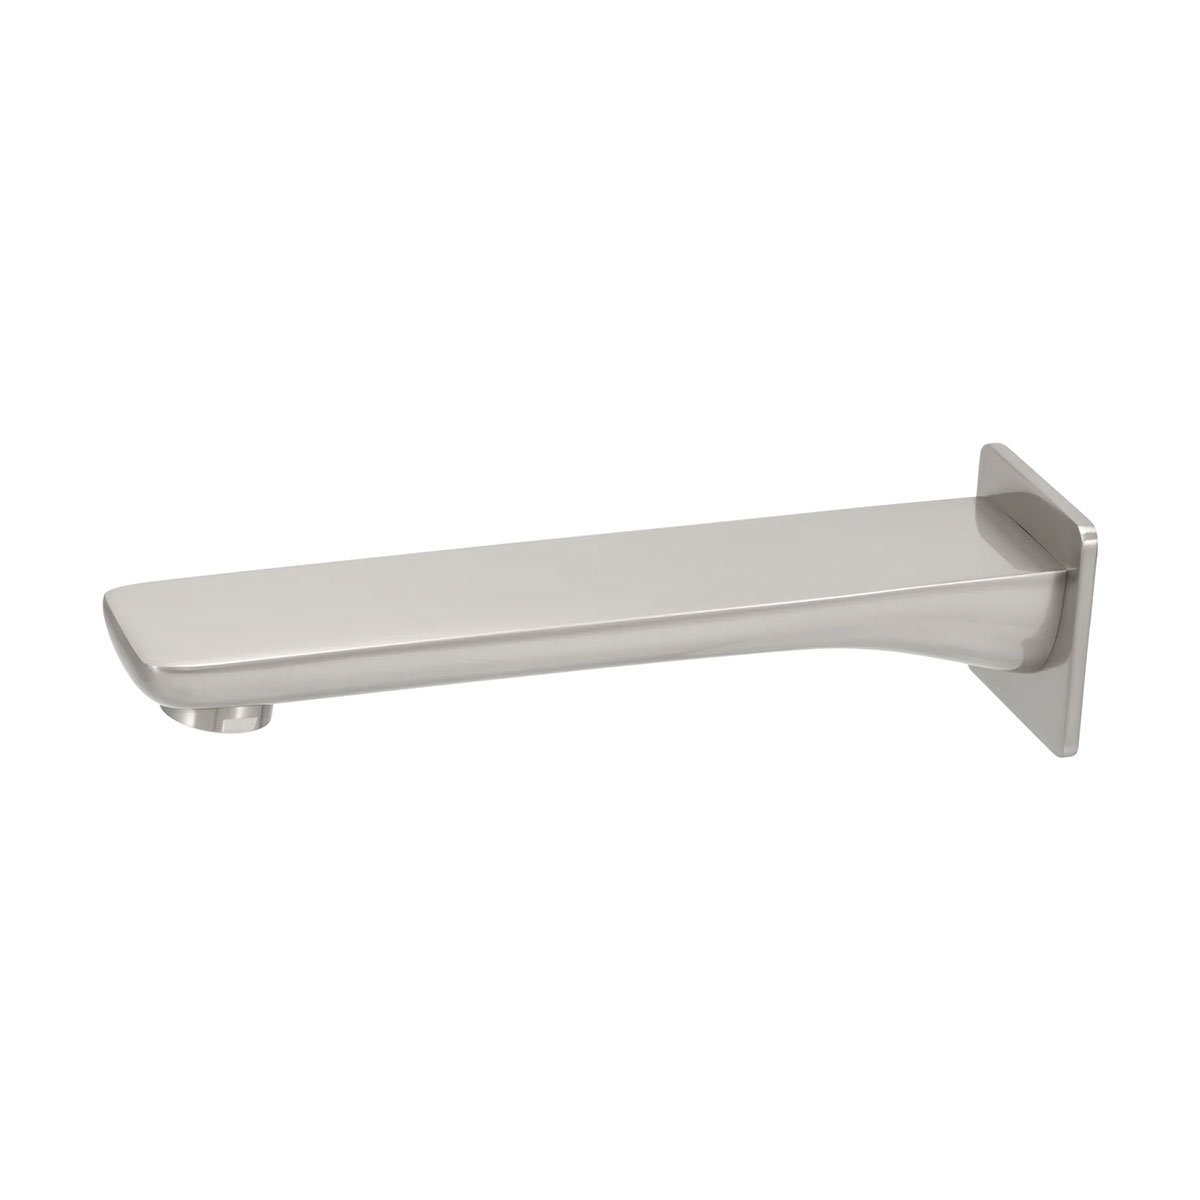 Brushed Nickel Finish Wall Mounted Tub Spout